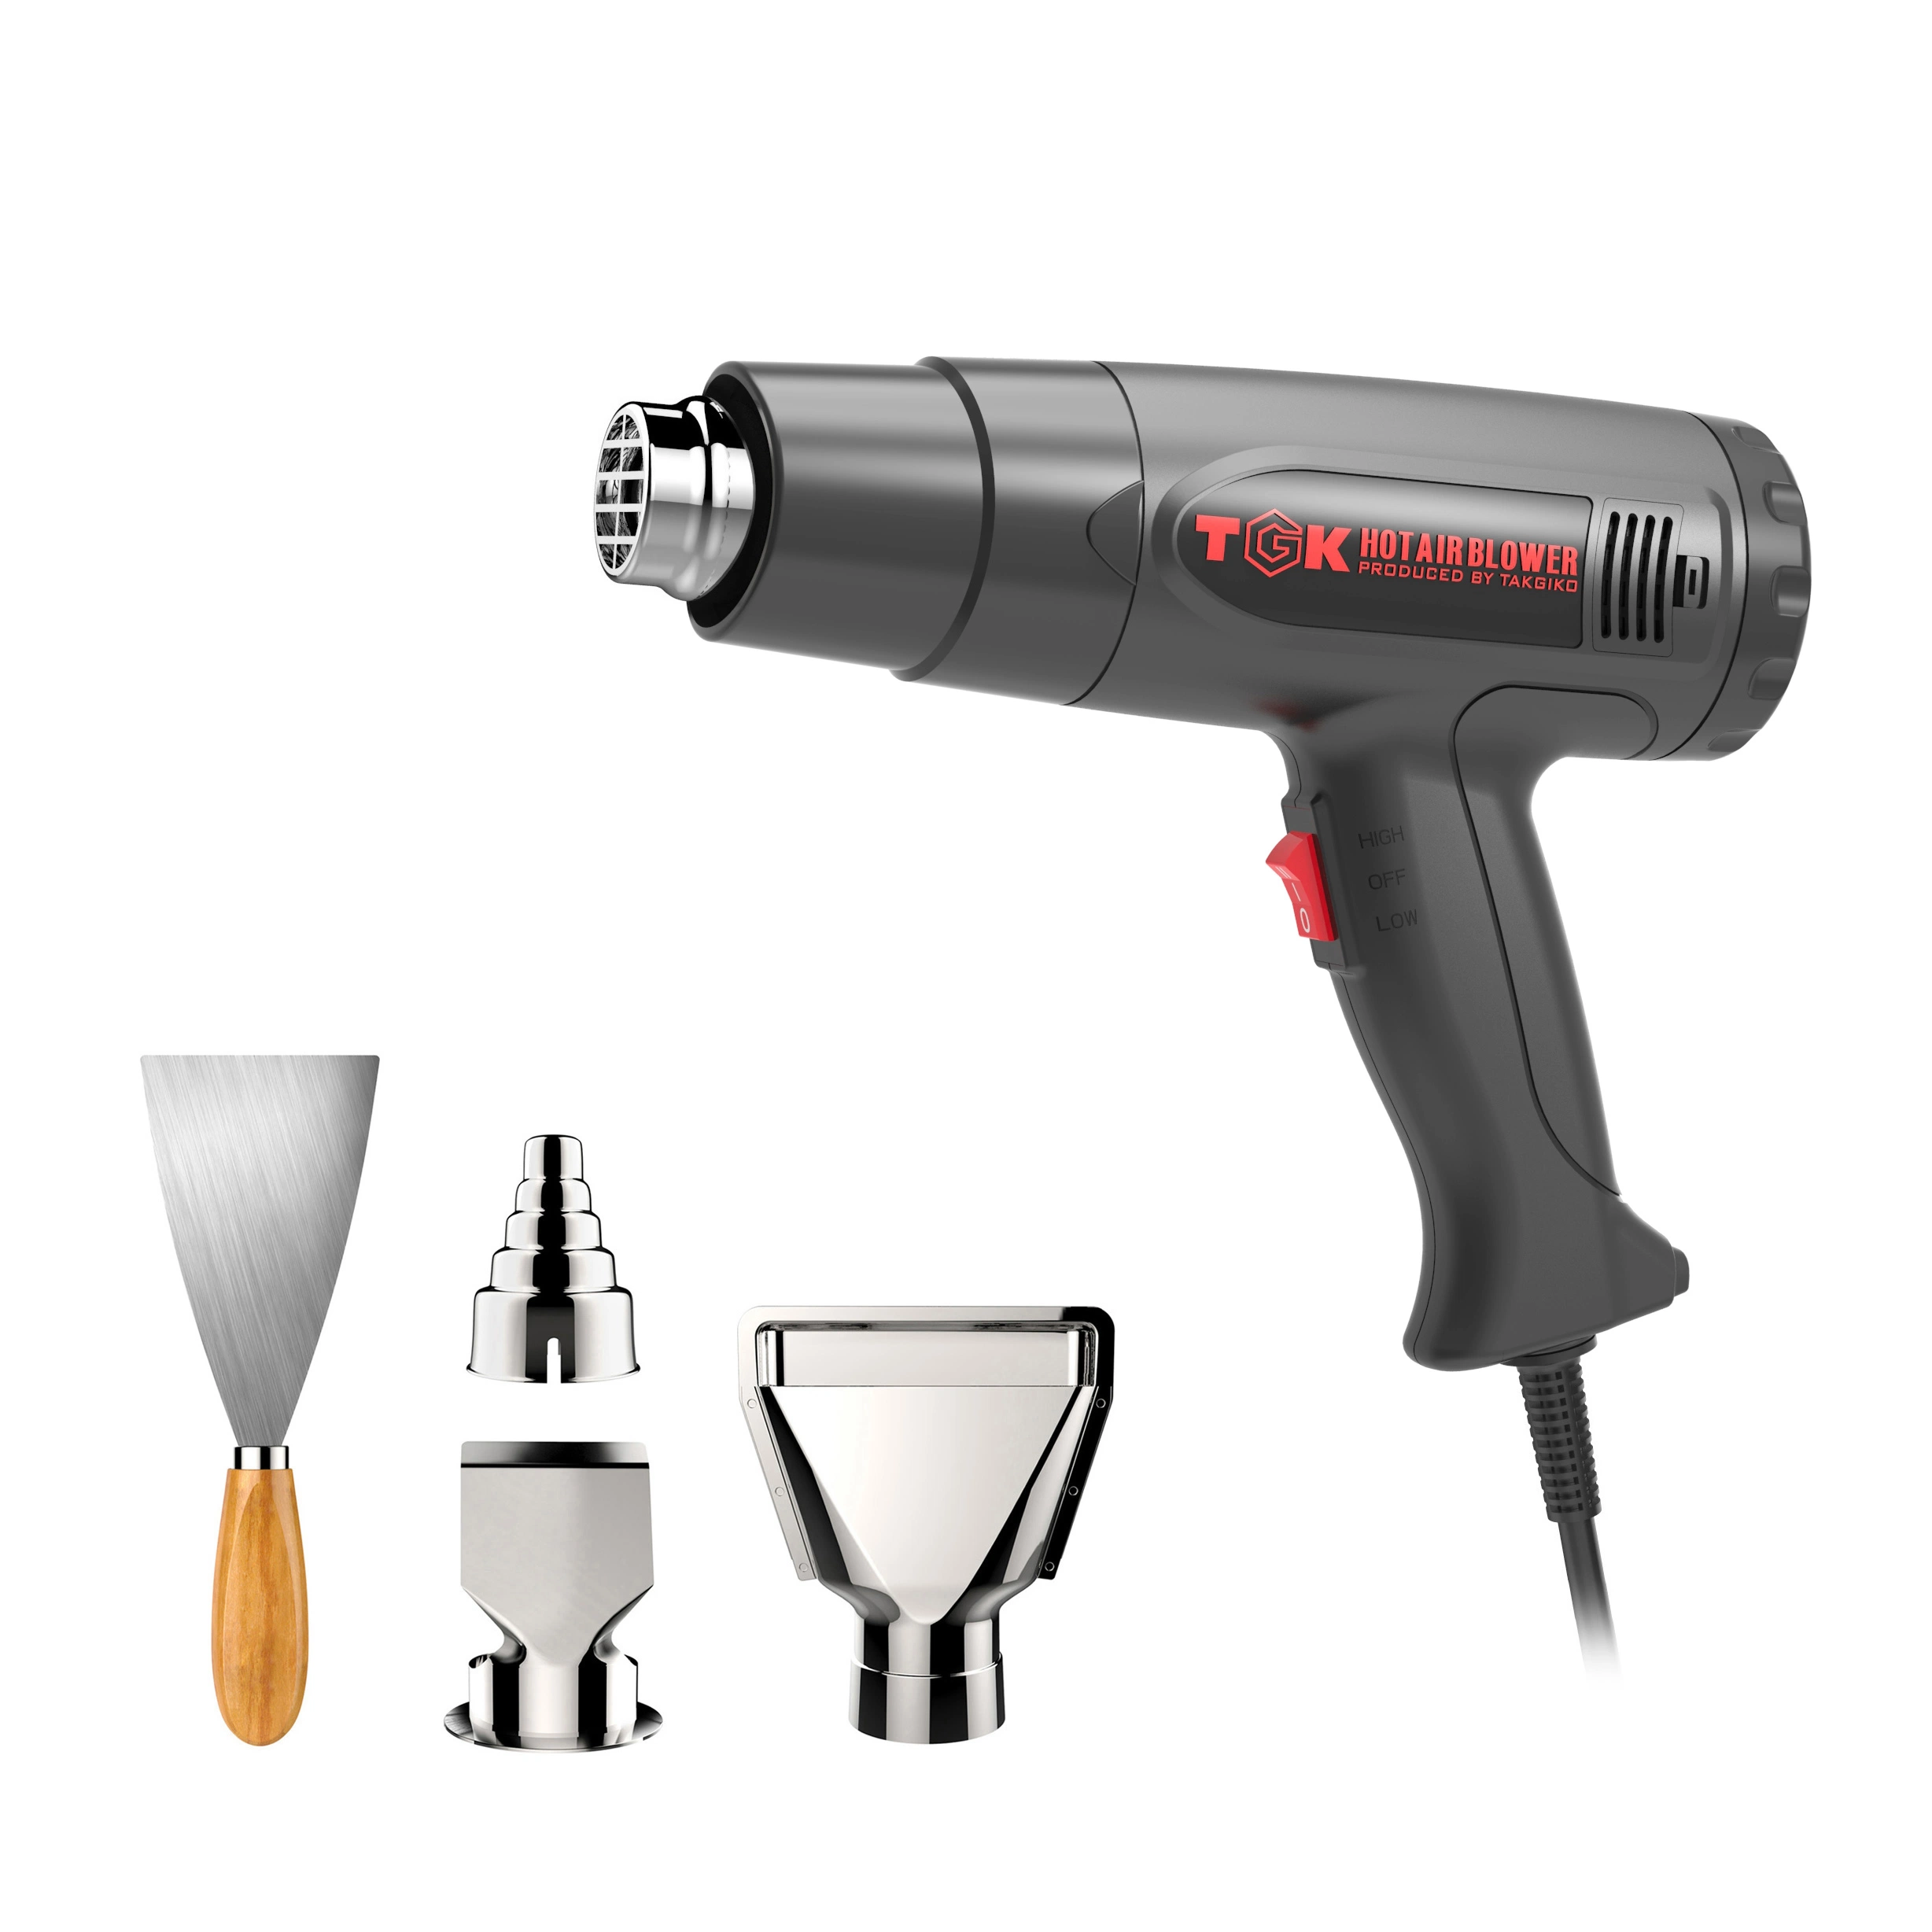 Professional Craft Heat Gun for Large Surface Bonding with Contact Adhesive Hg6618